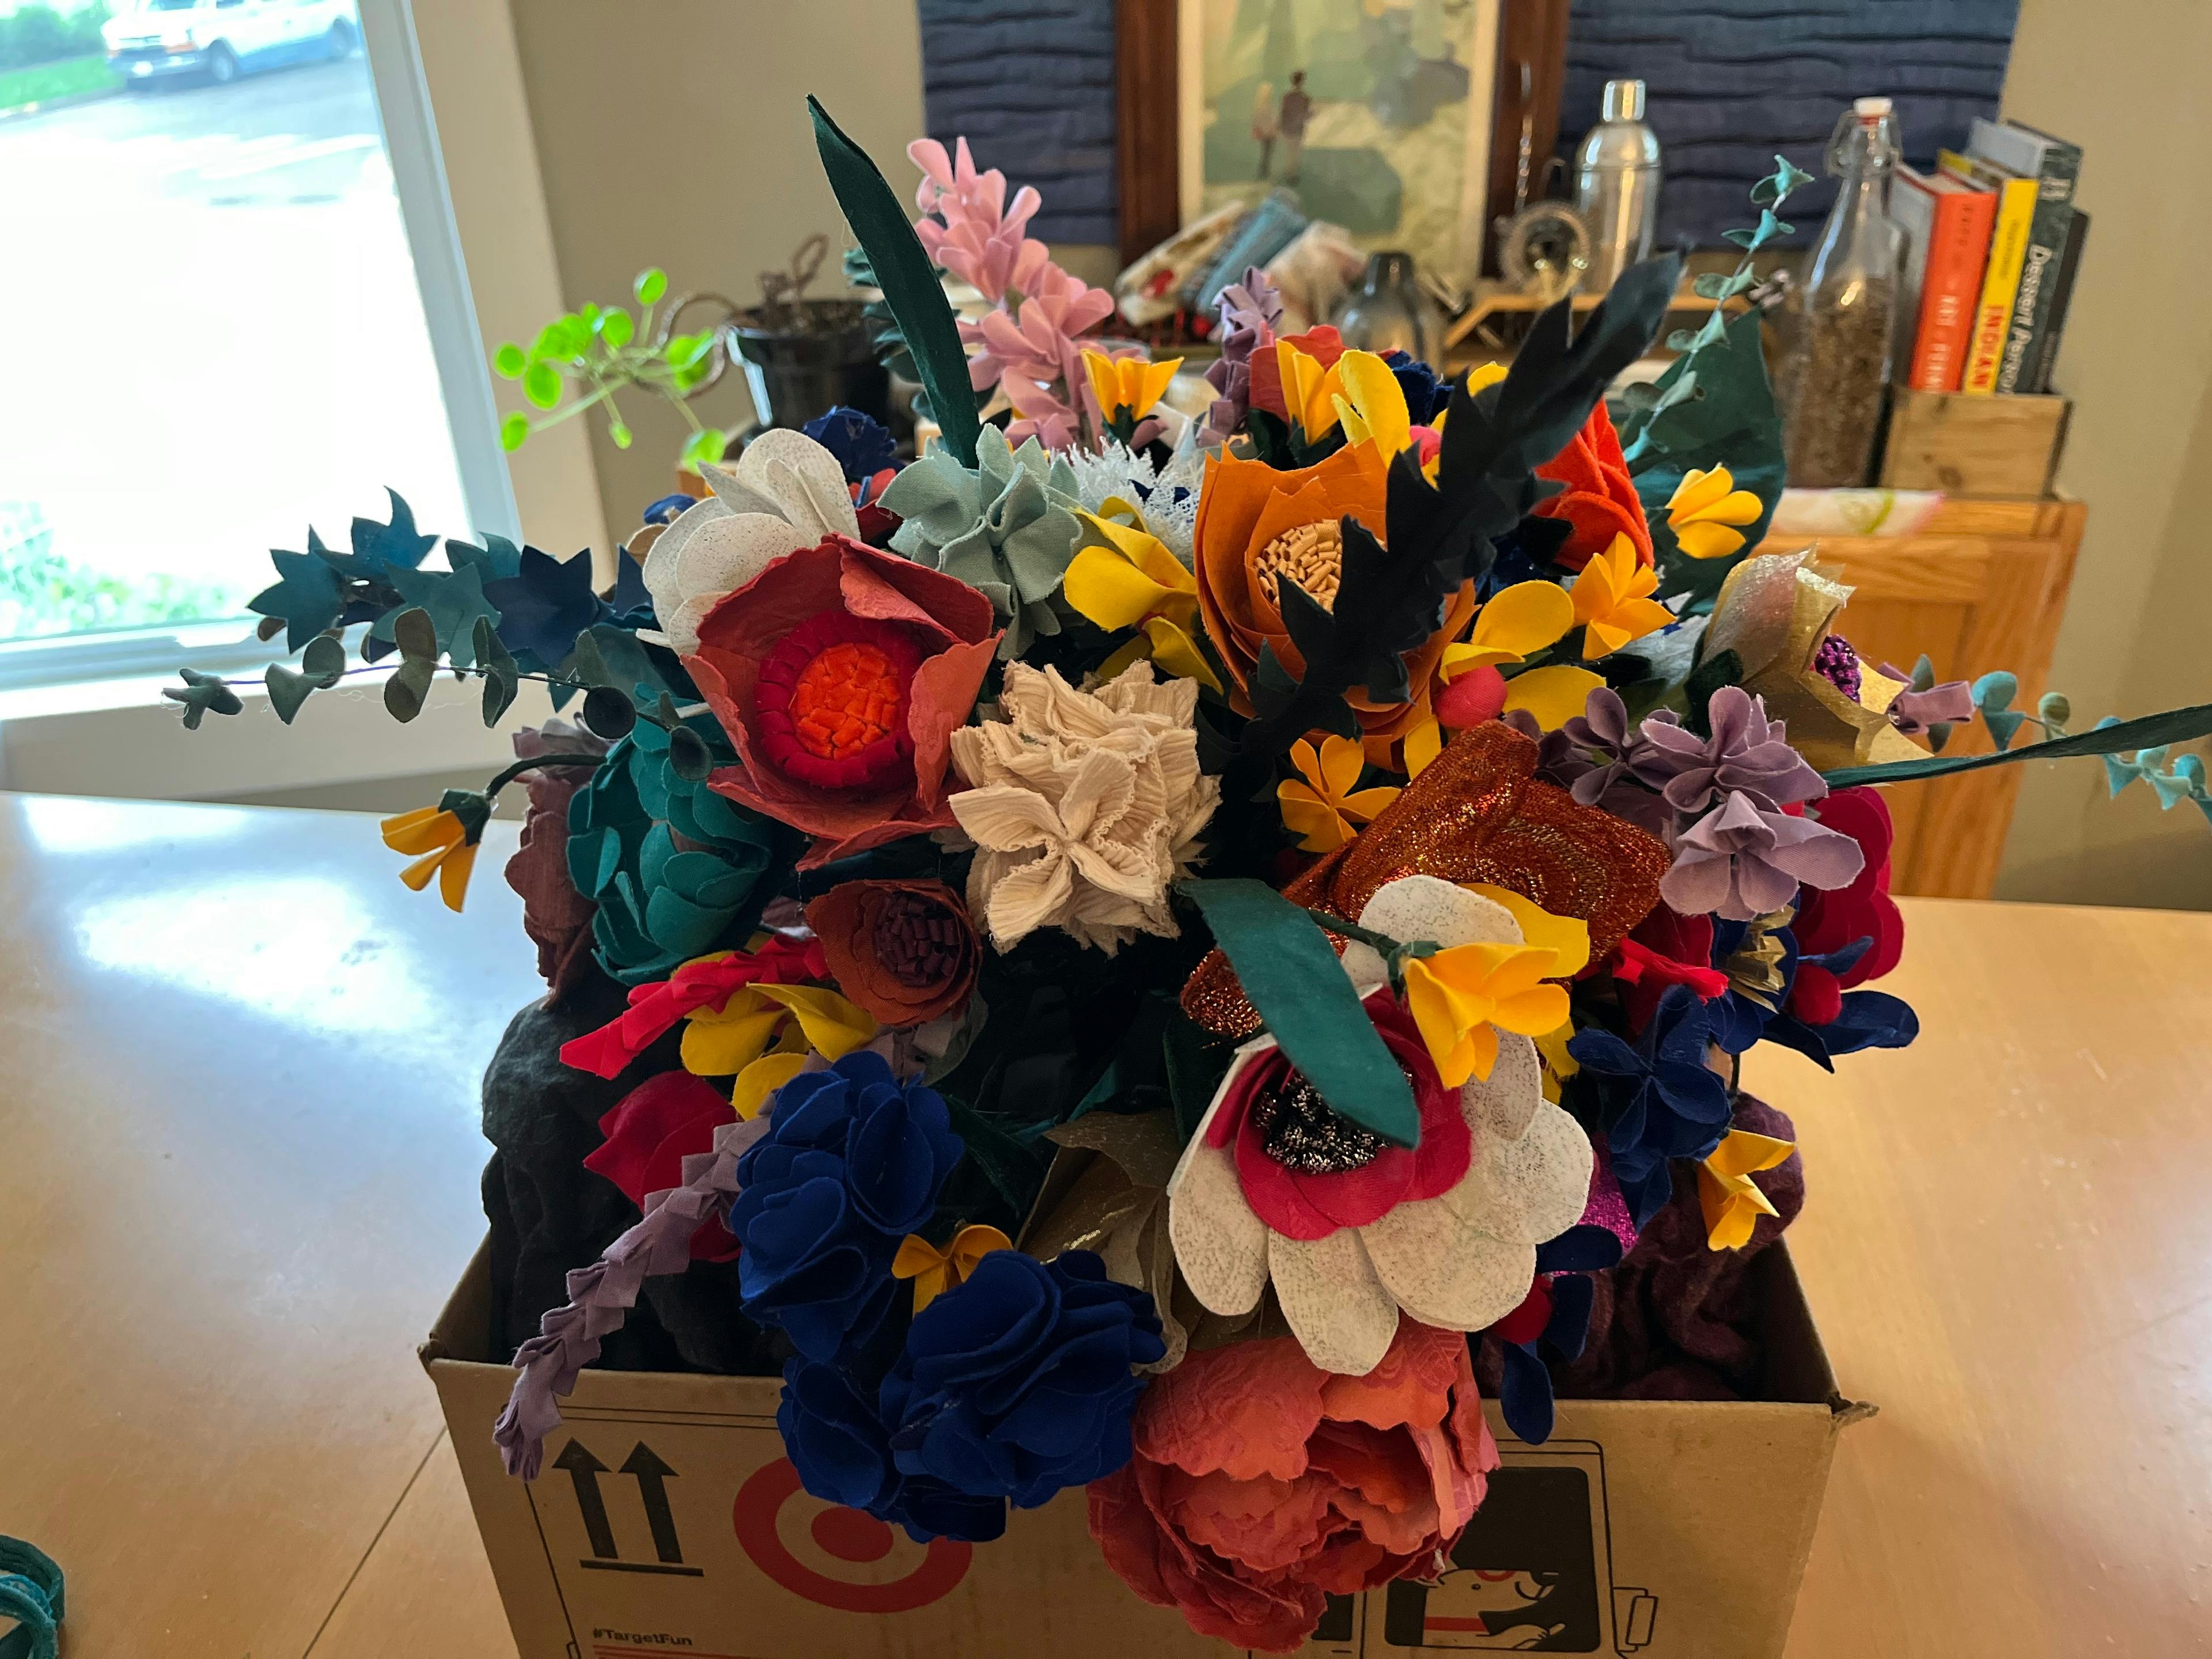 The bouquet in the box